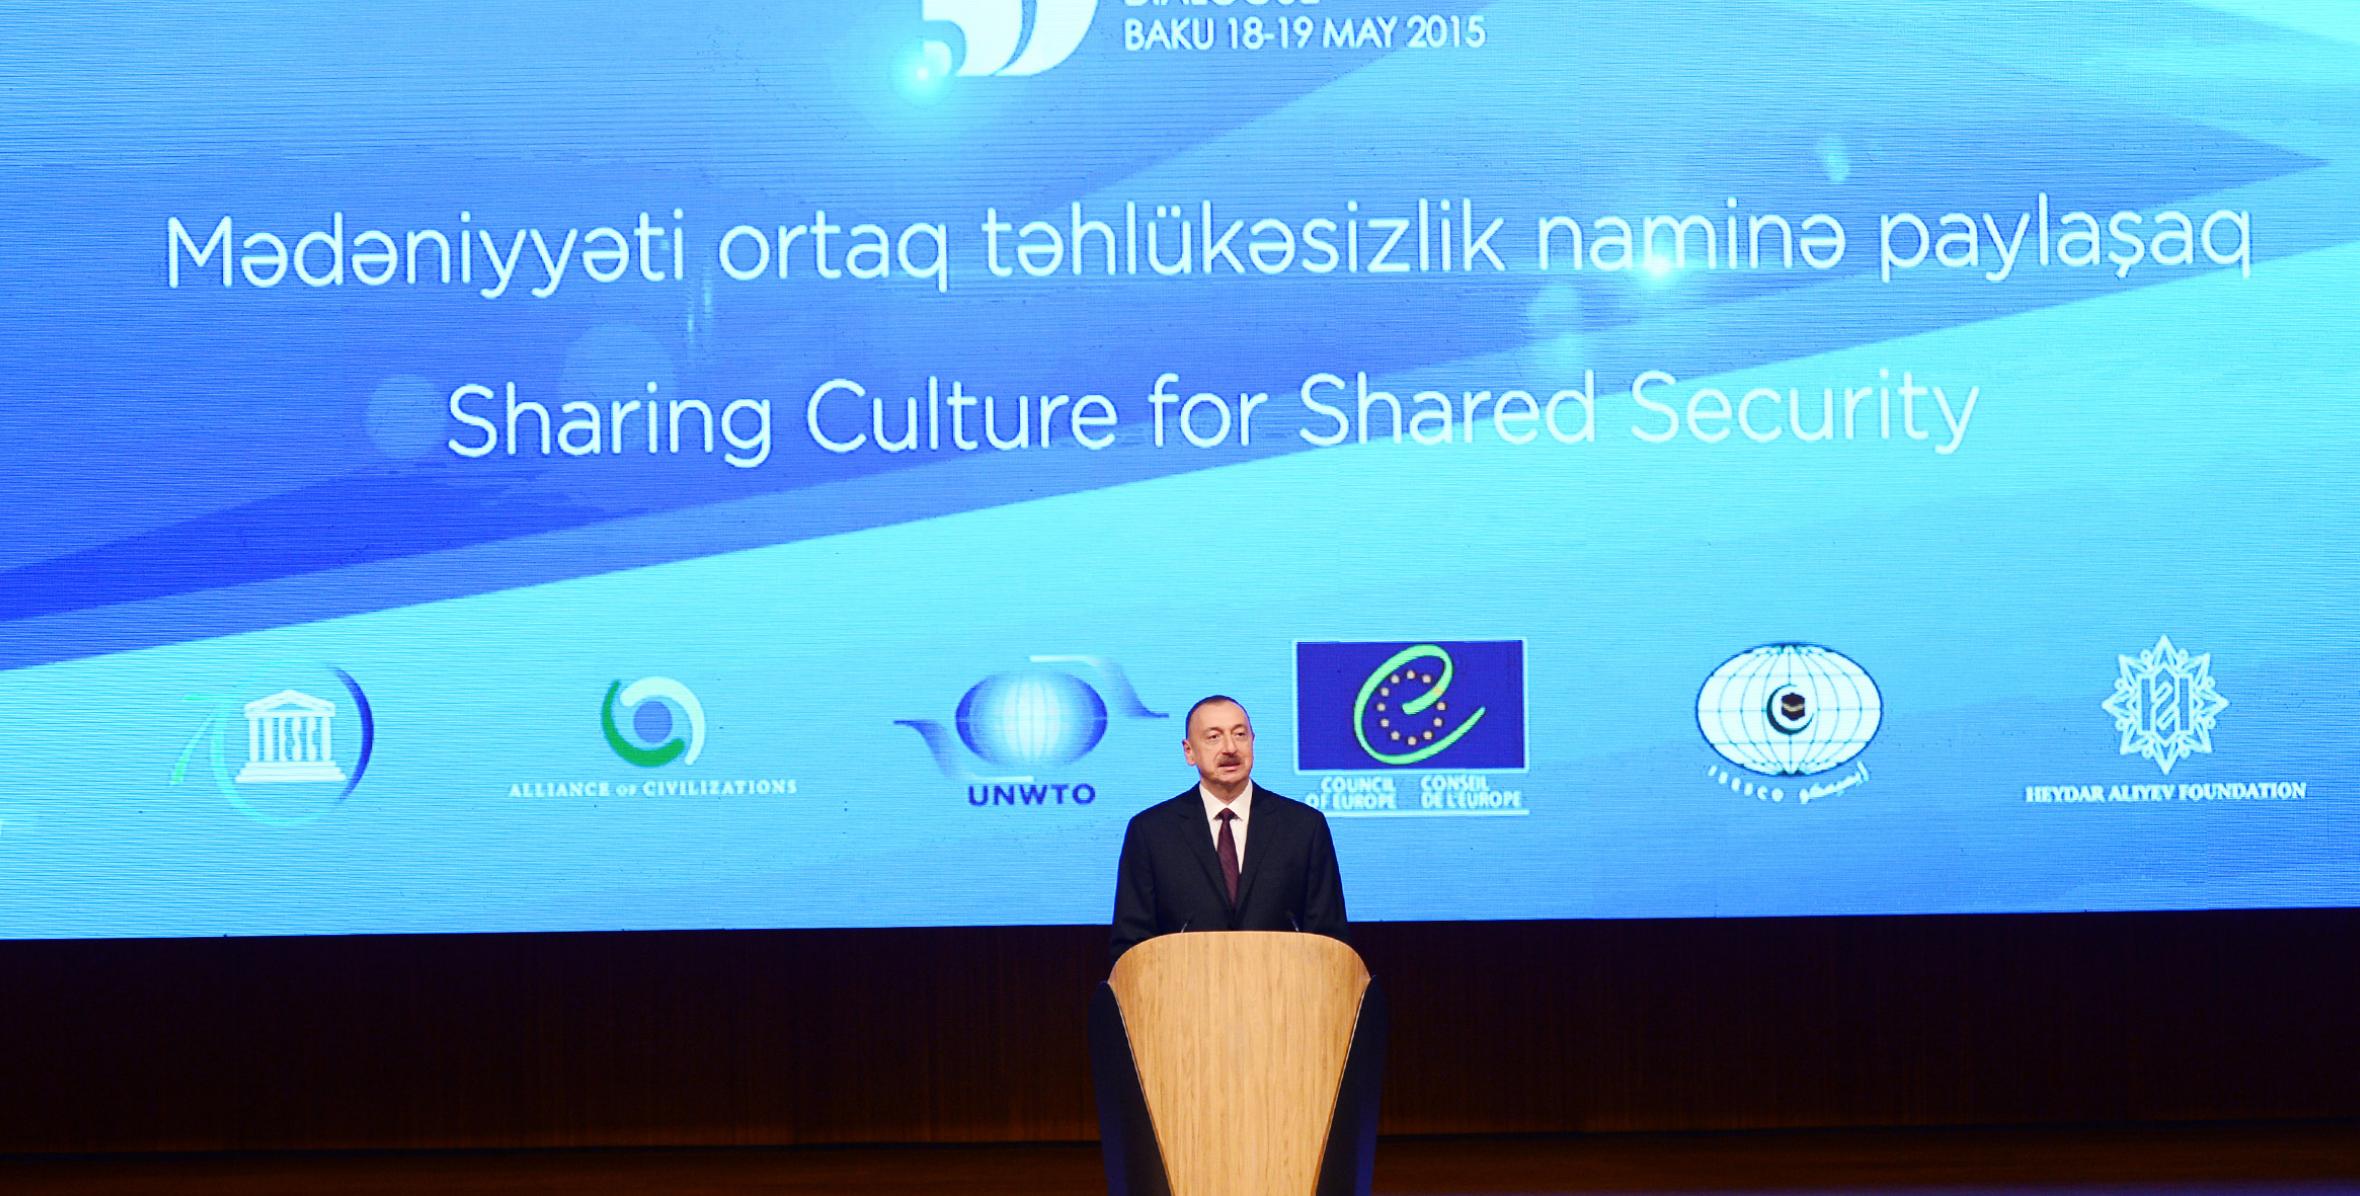 Ilham Aliyev attended the opening of the 3rd World Forum on Intercultural Dialogue